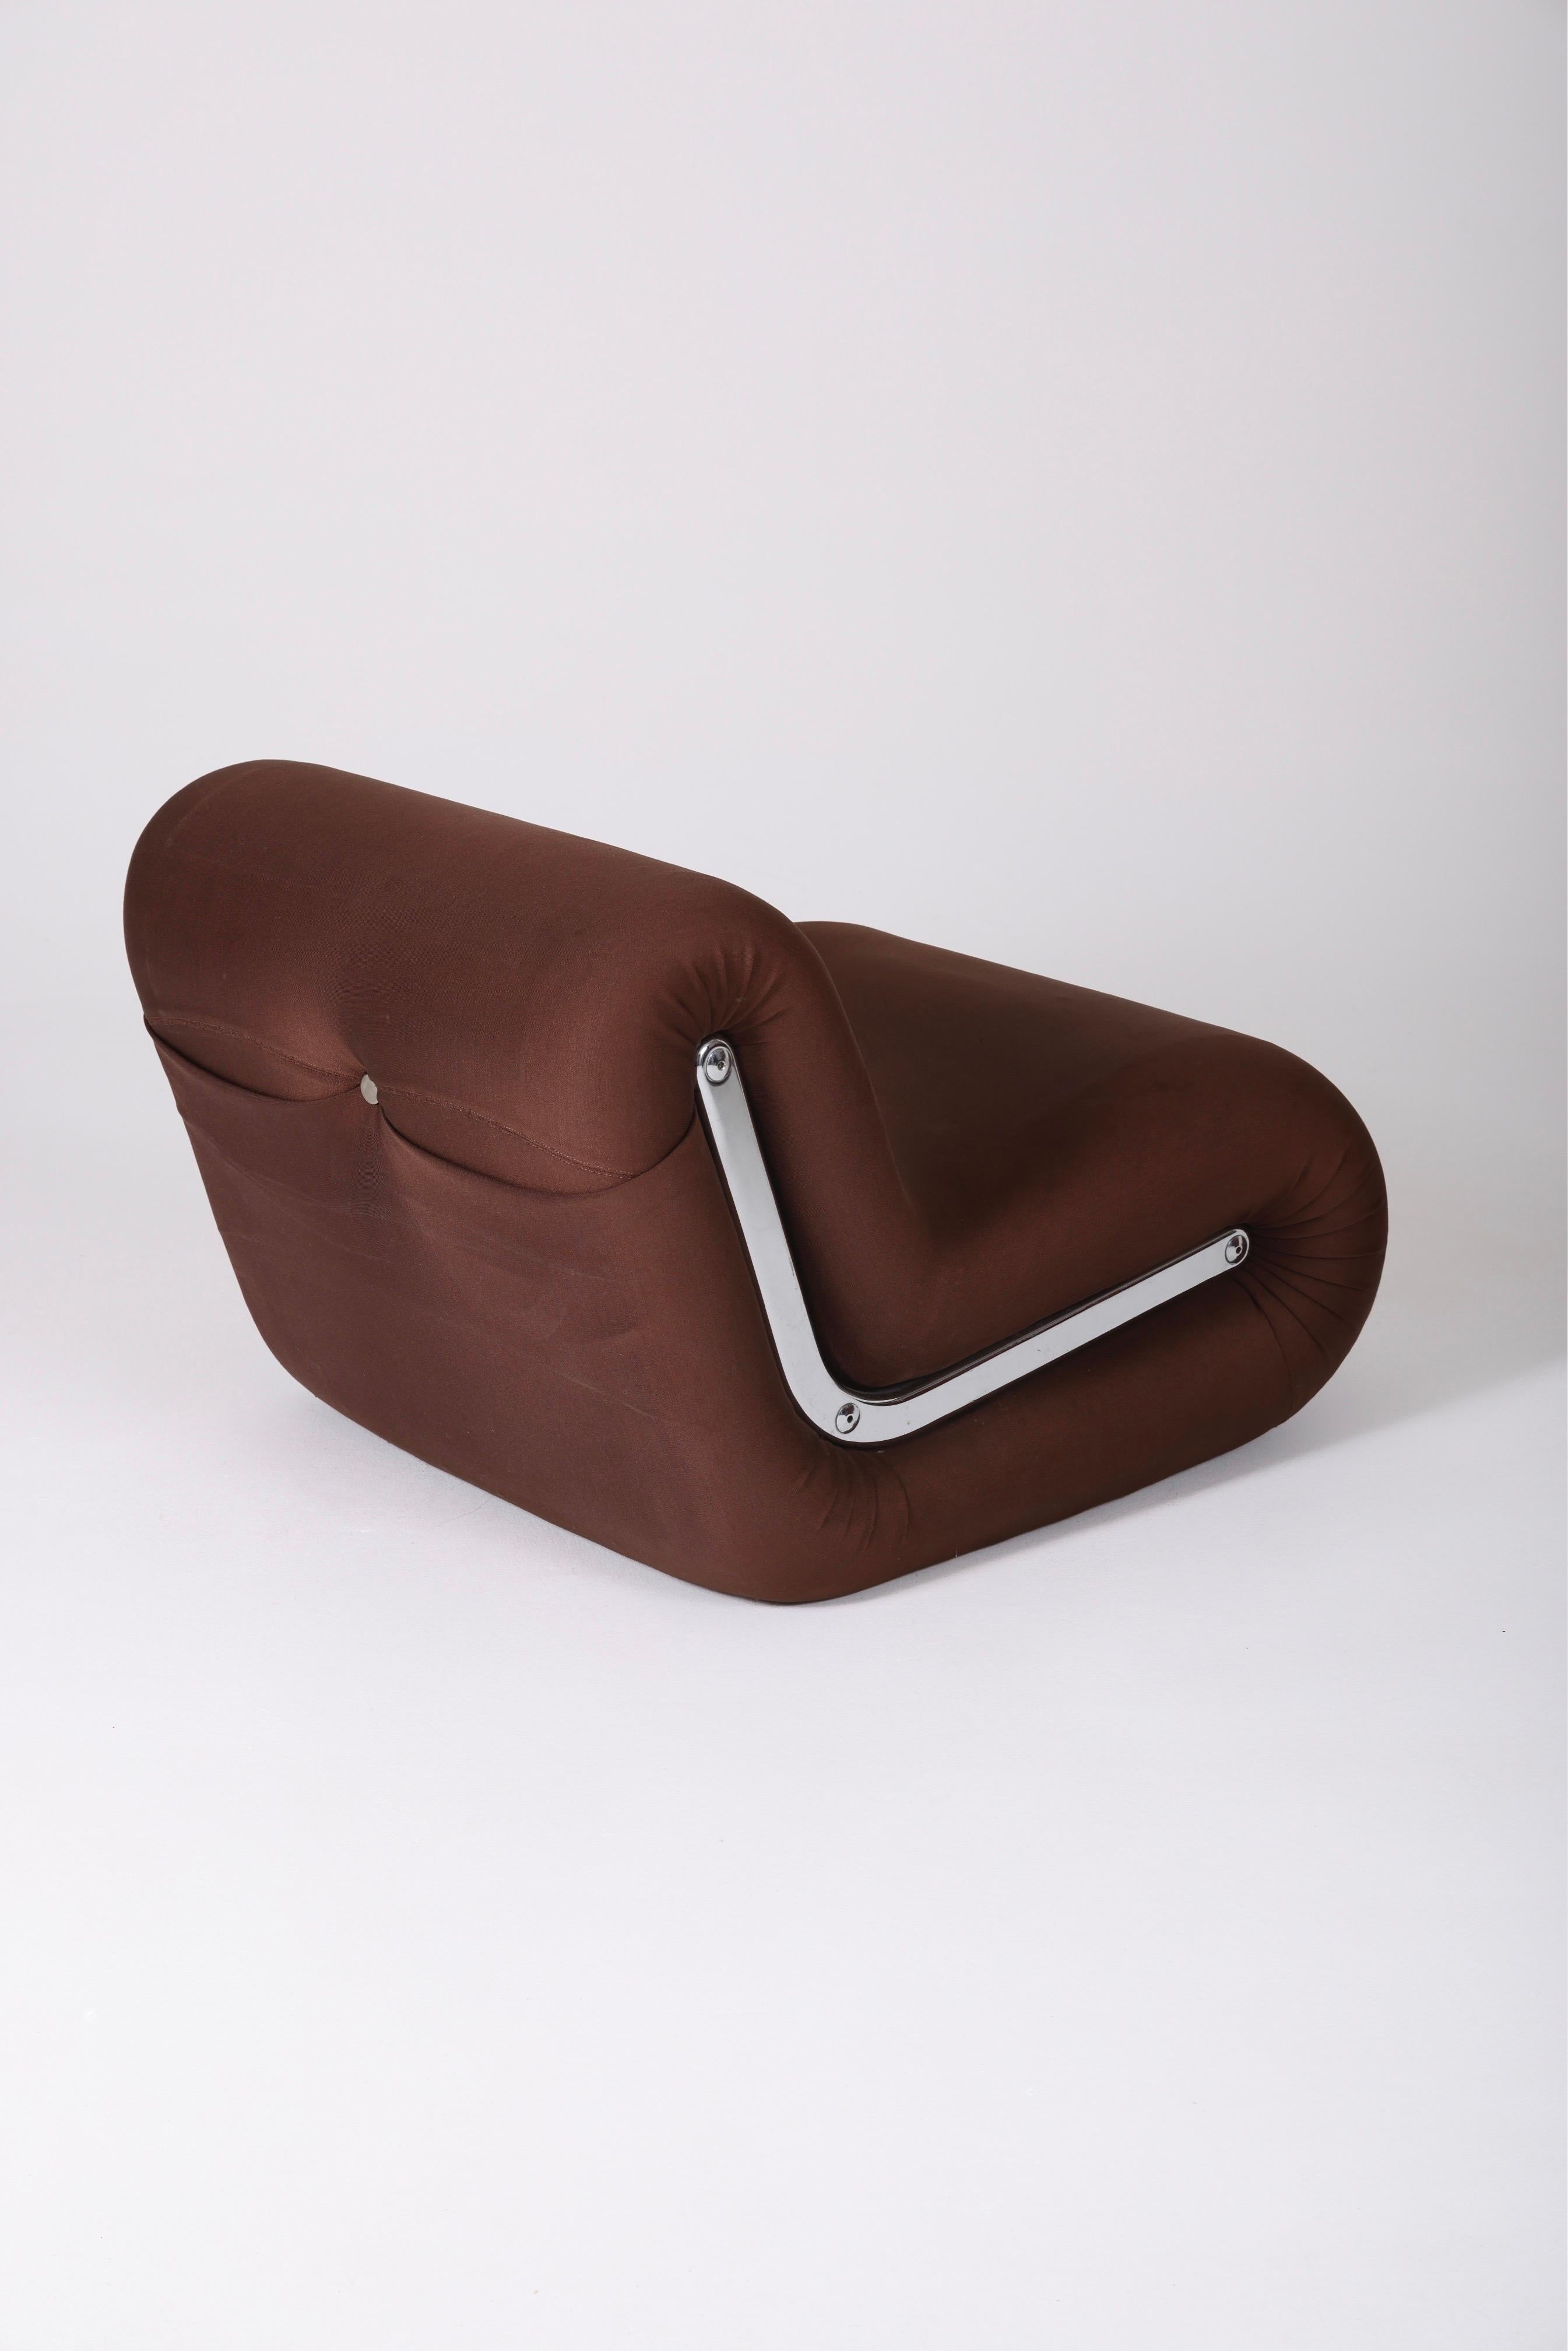 Boomerang Armchair by Rodolfo Bonetto, 1960s, Italy For Sale 3